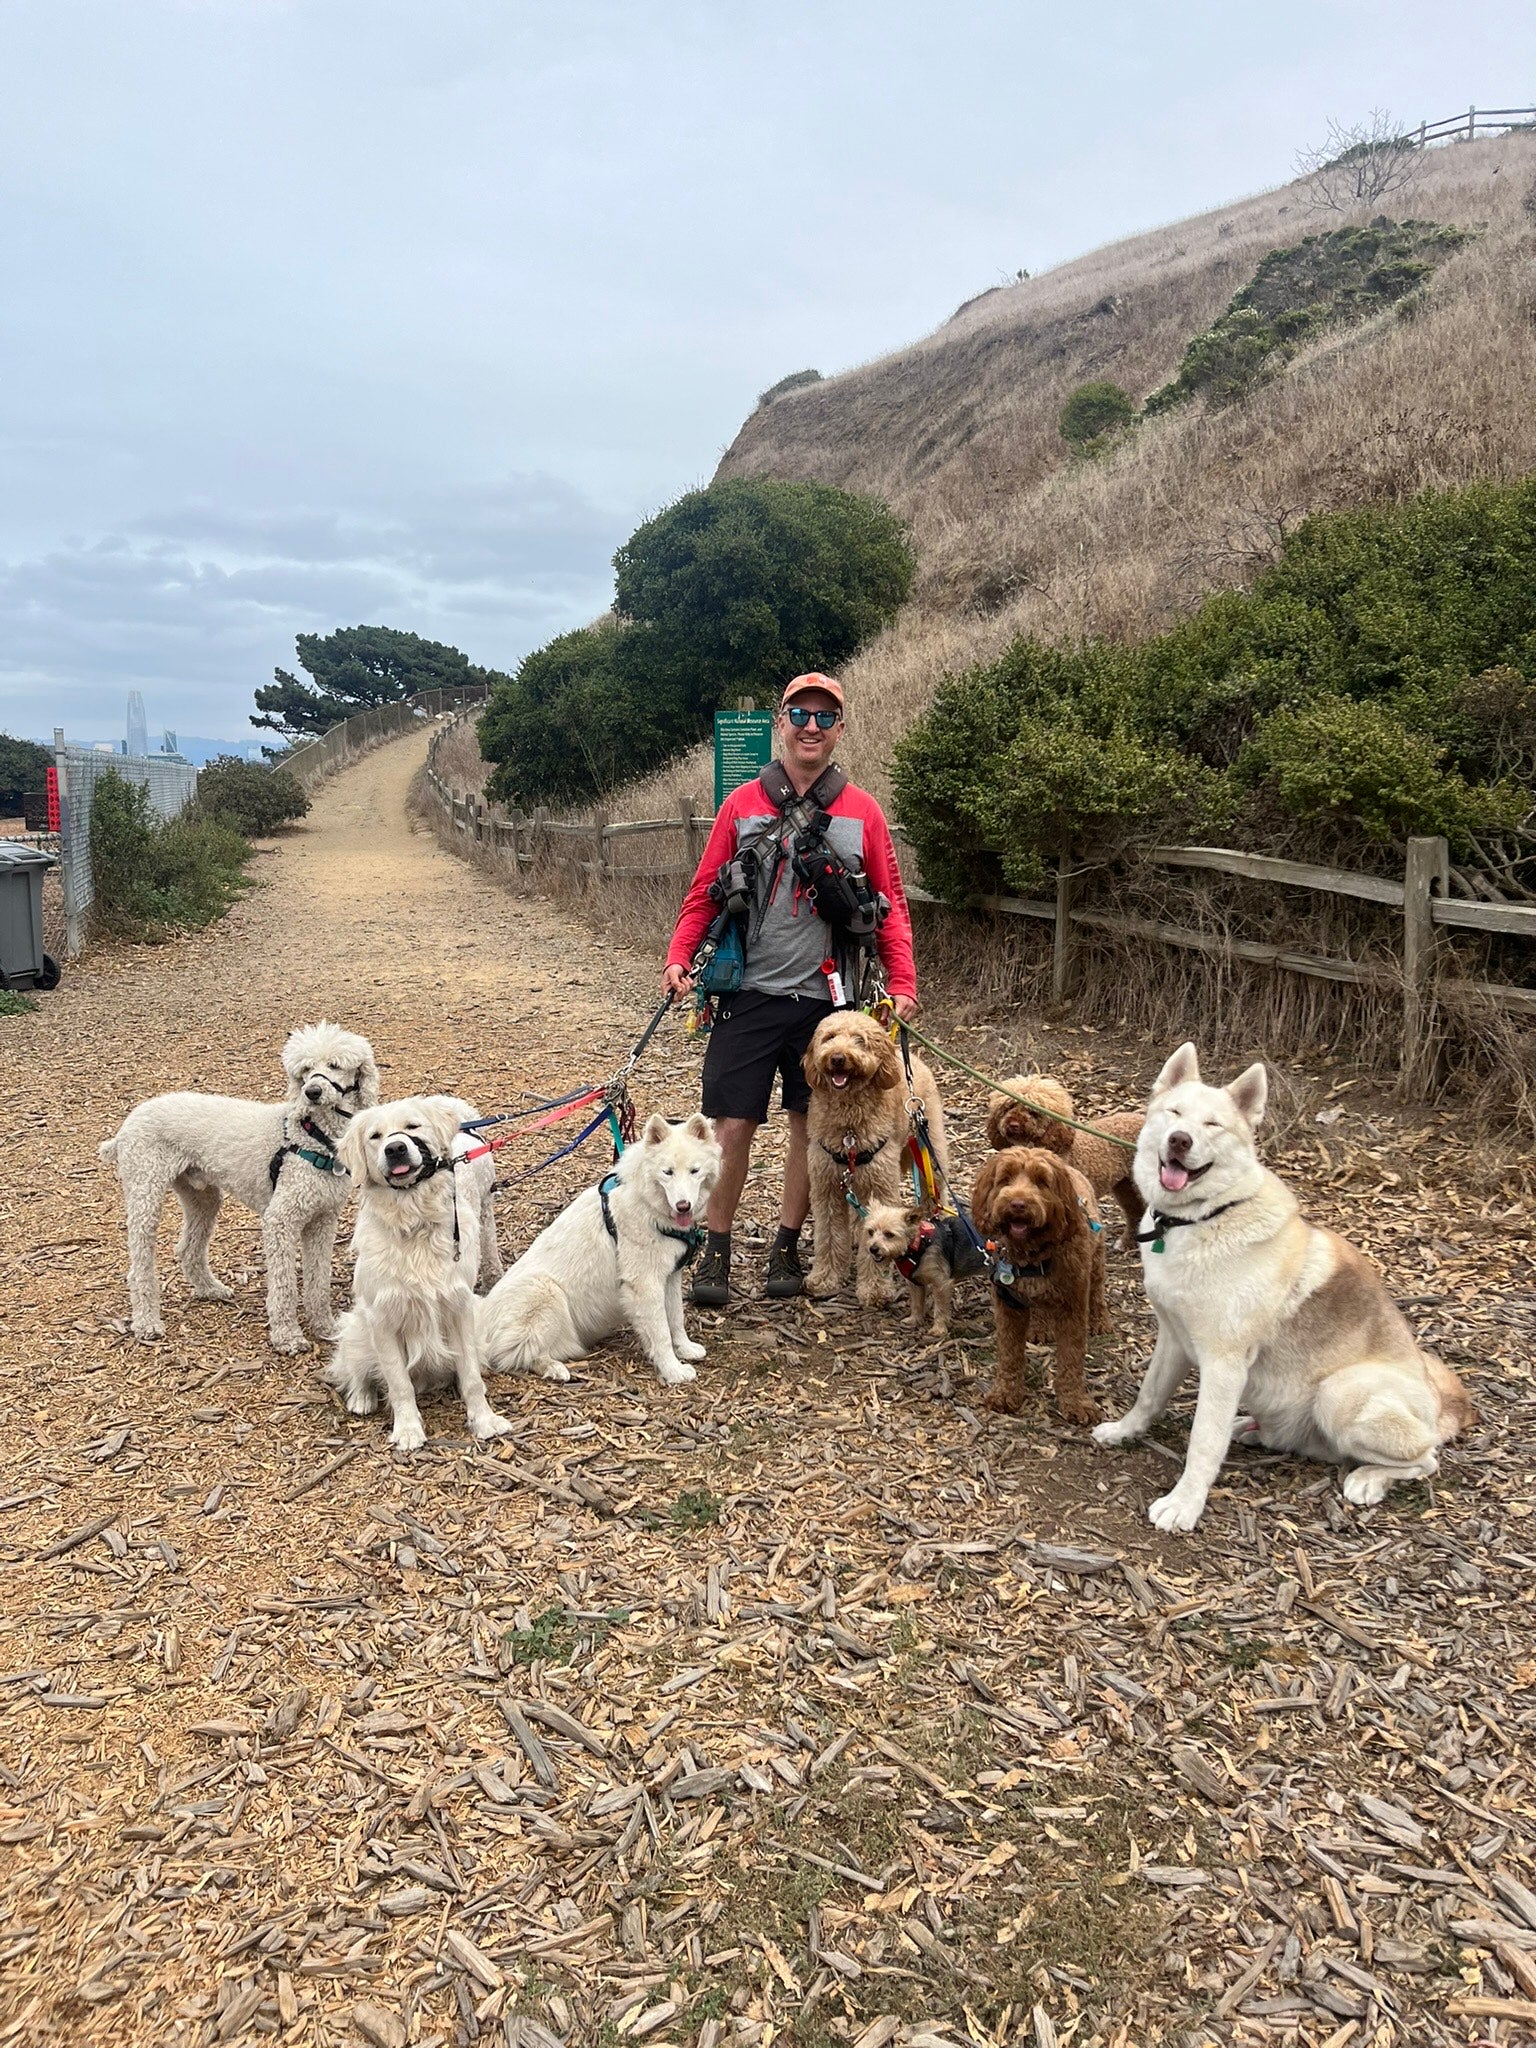 A male Caucasian dog walker is posing with a group of 8 dogs all leashed to him. They are standing on the middle of a path covered in woodchips. There is a high, steep slope in the background.